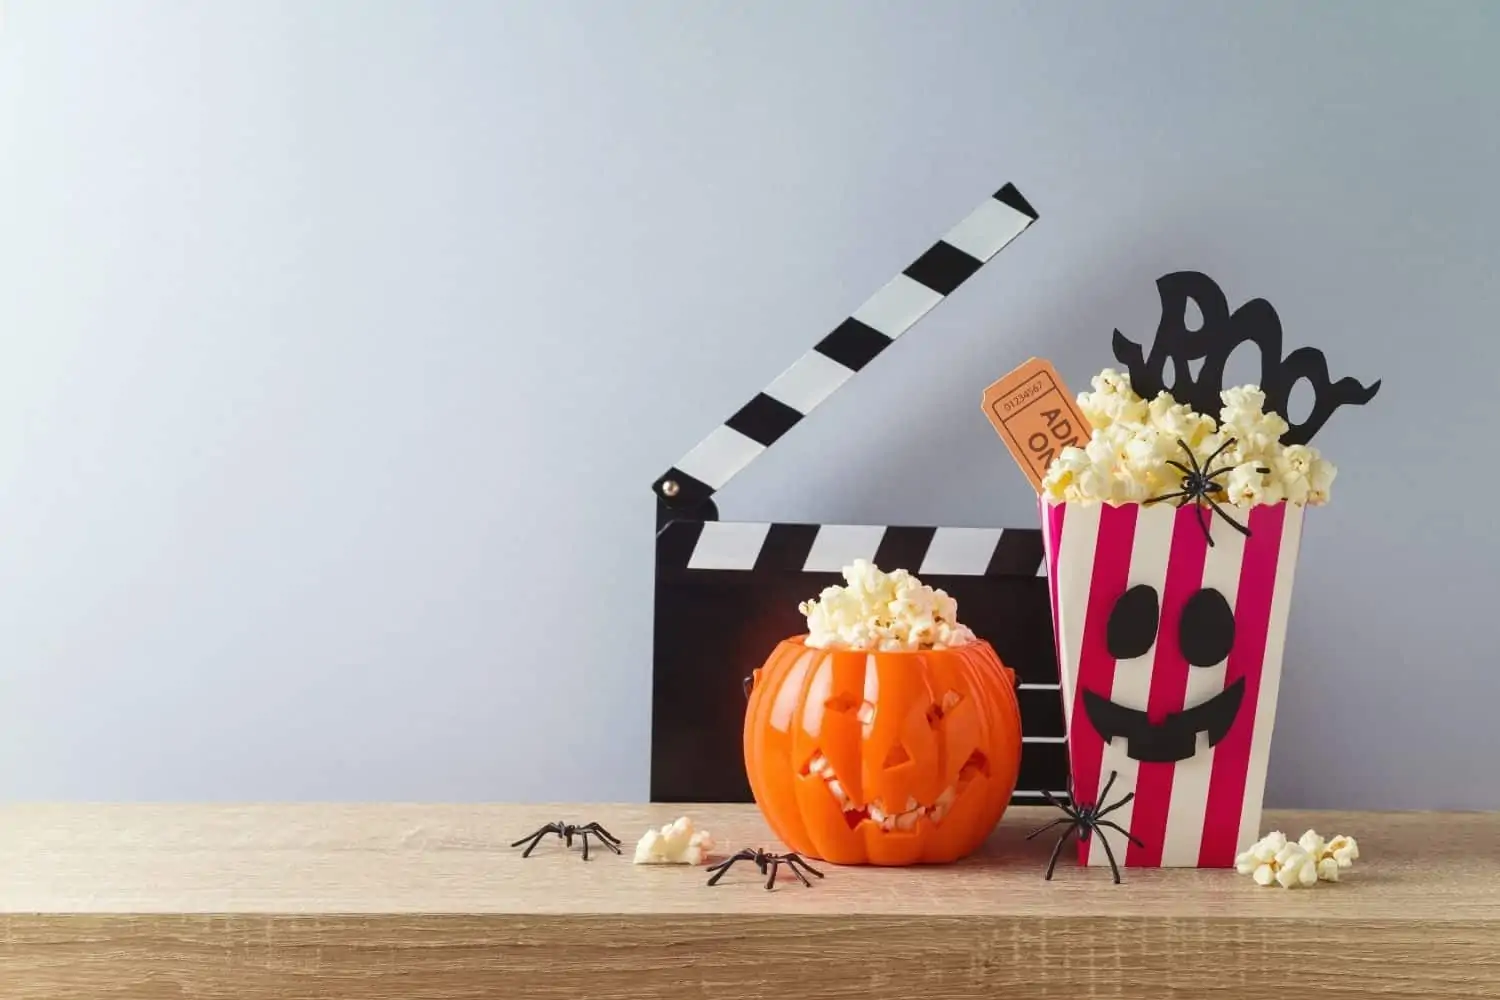 Spookiest Movies to Watch This Hallows Eve